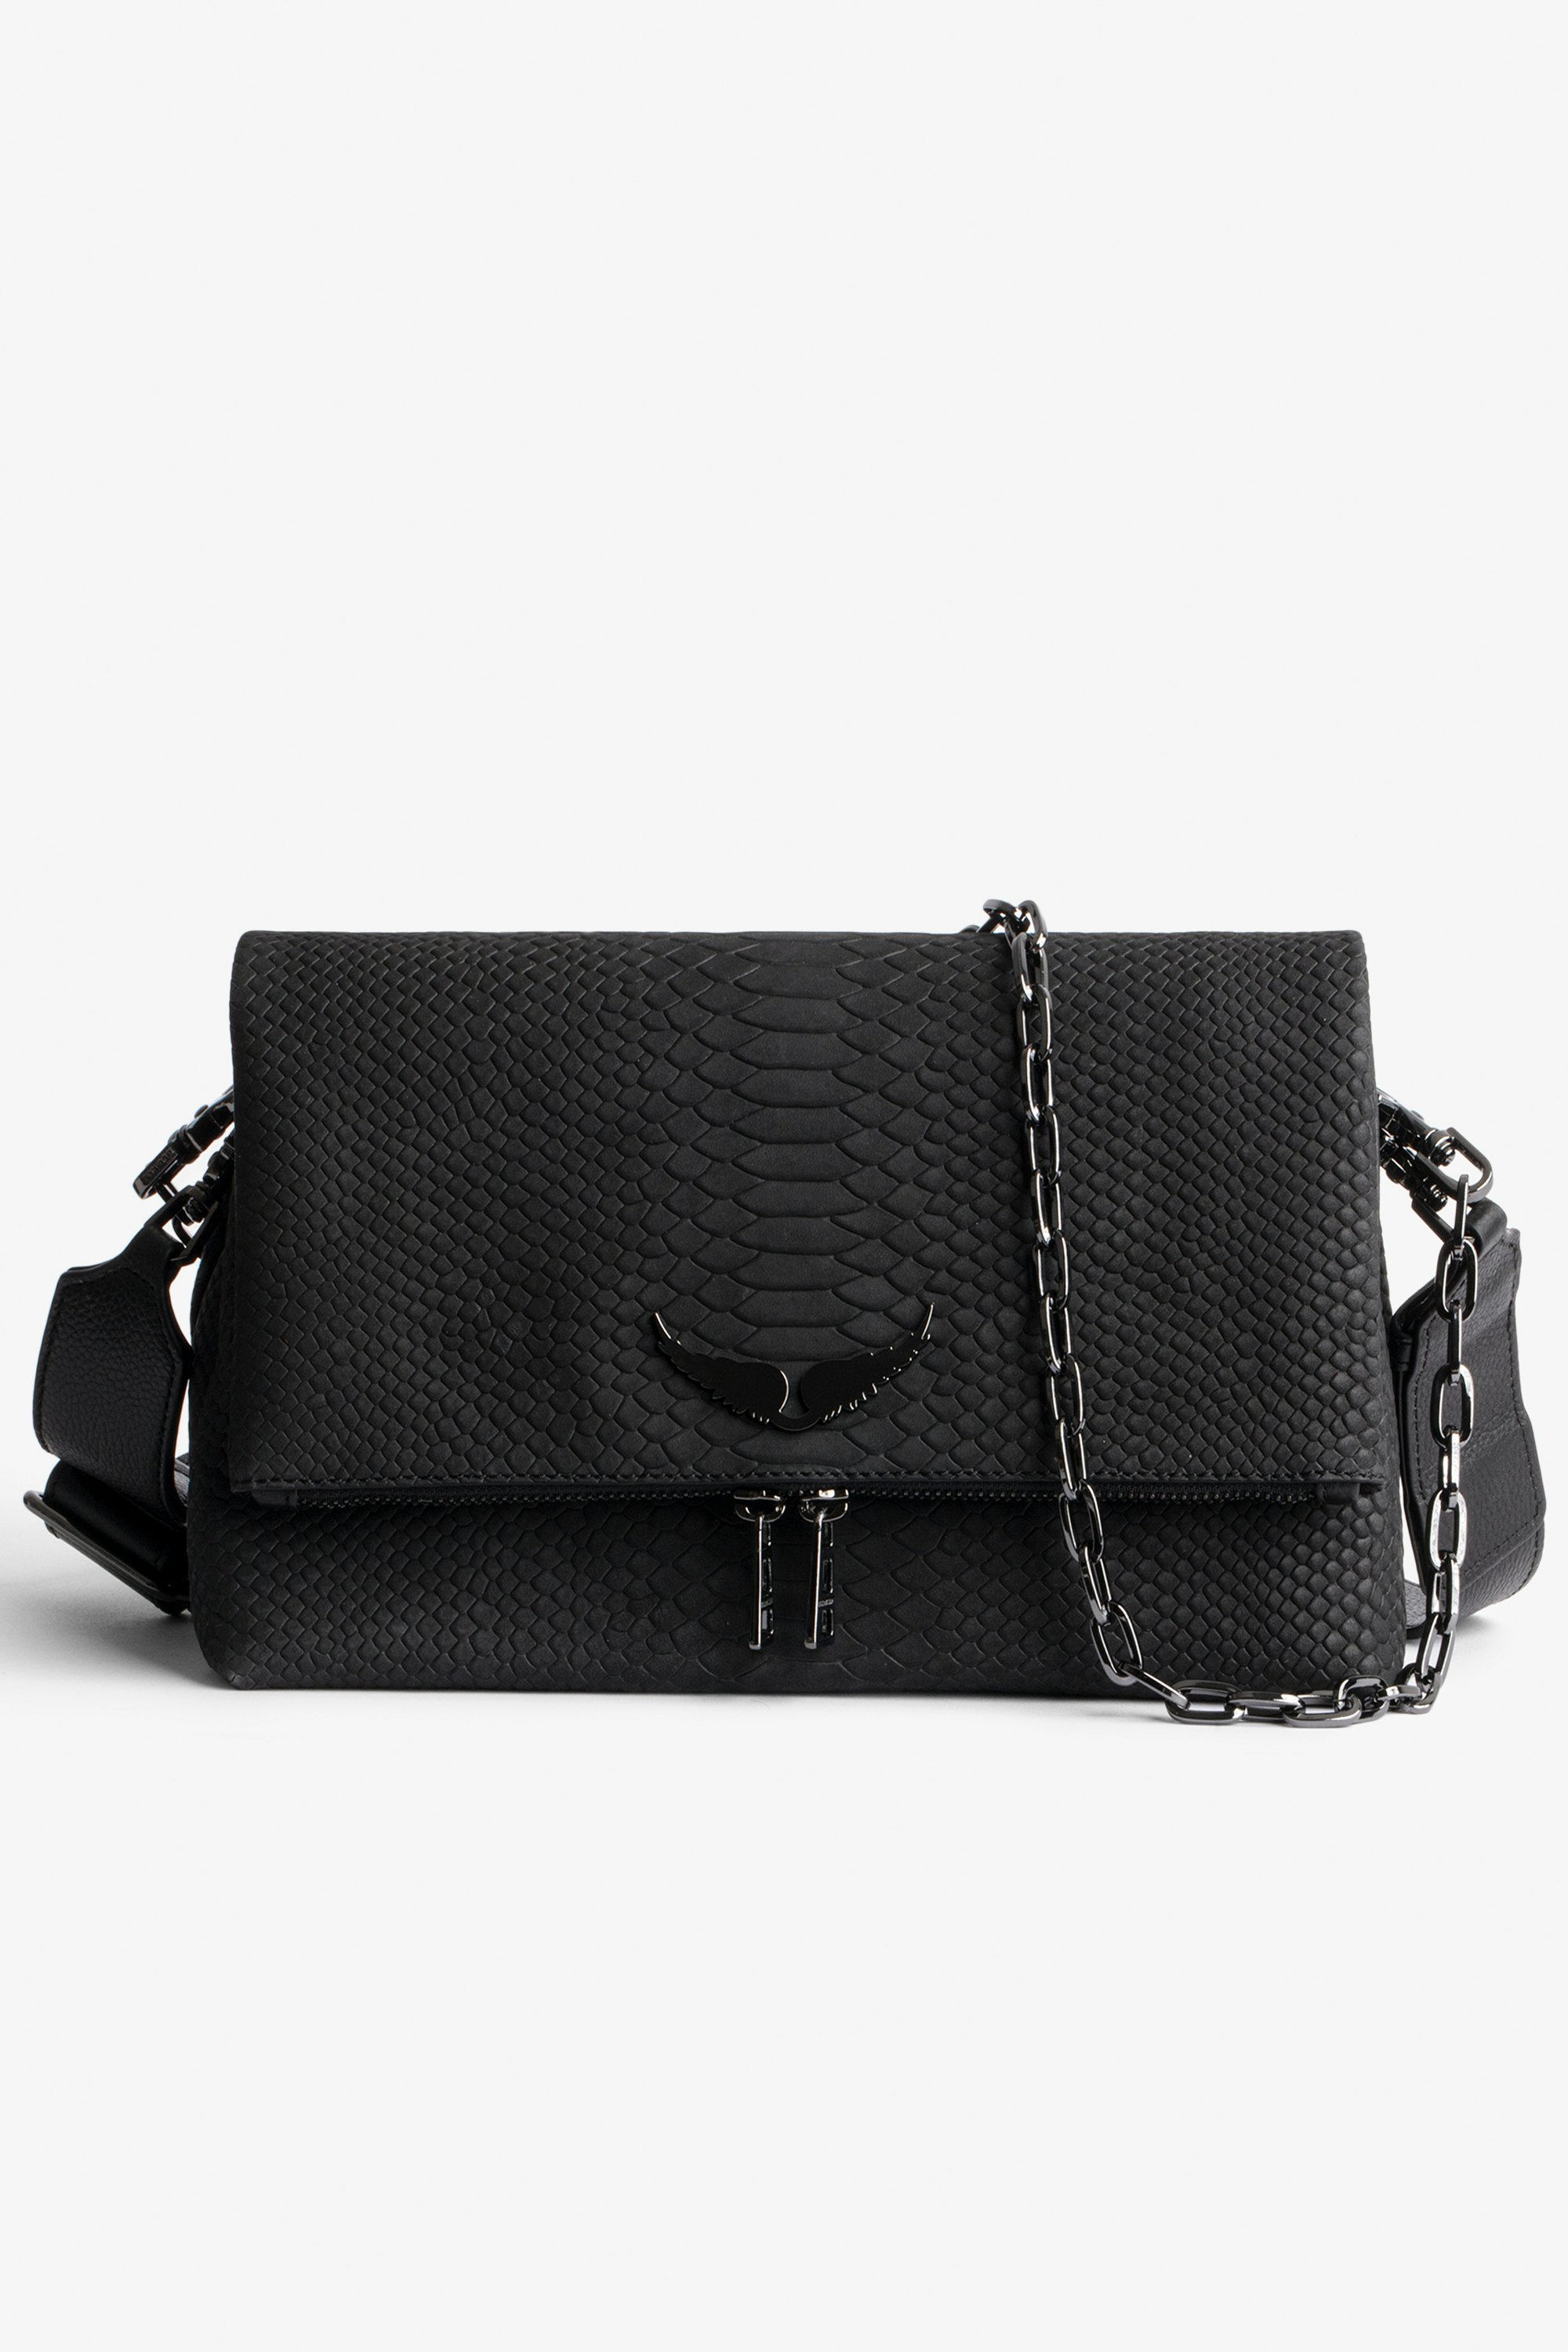 Rocky Soft Savage Bag - Women’s bag in black python-effect leather with a chain shoulder strap